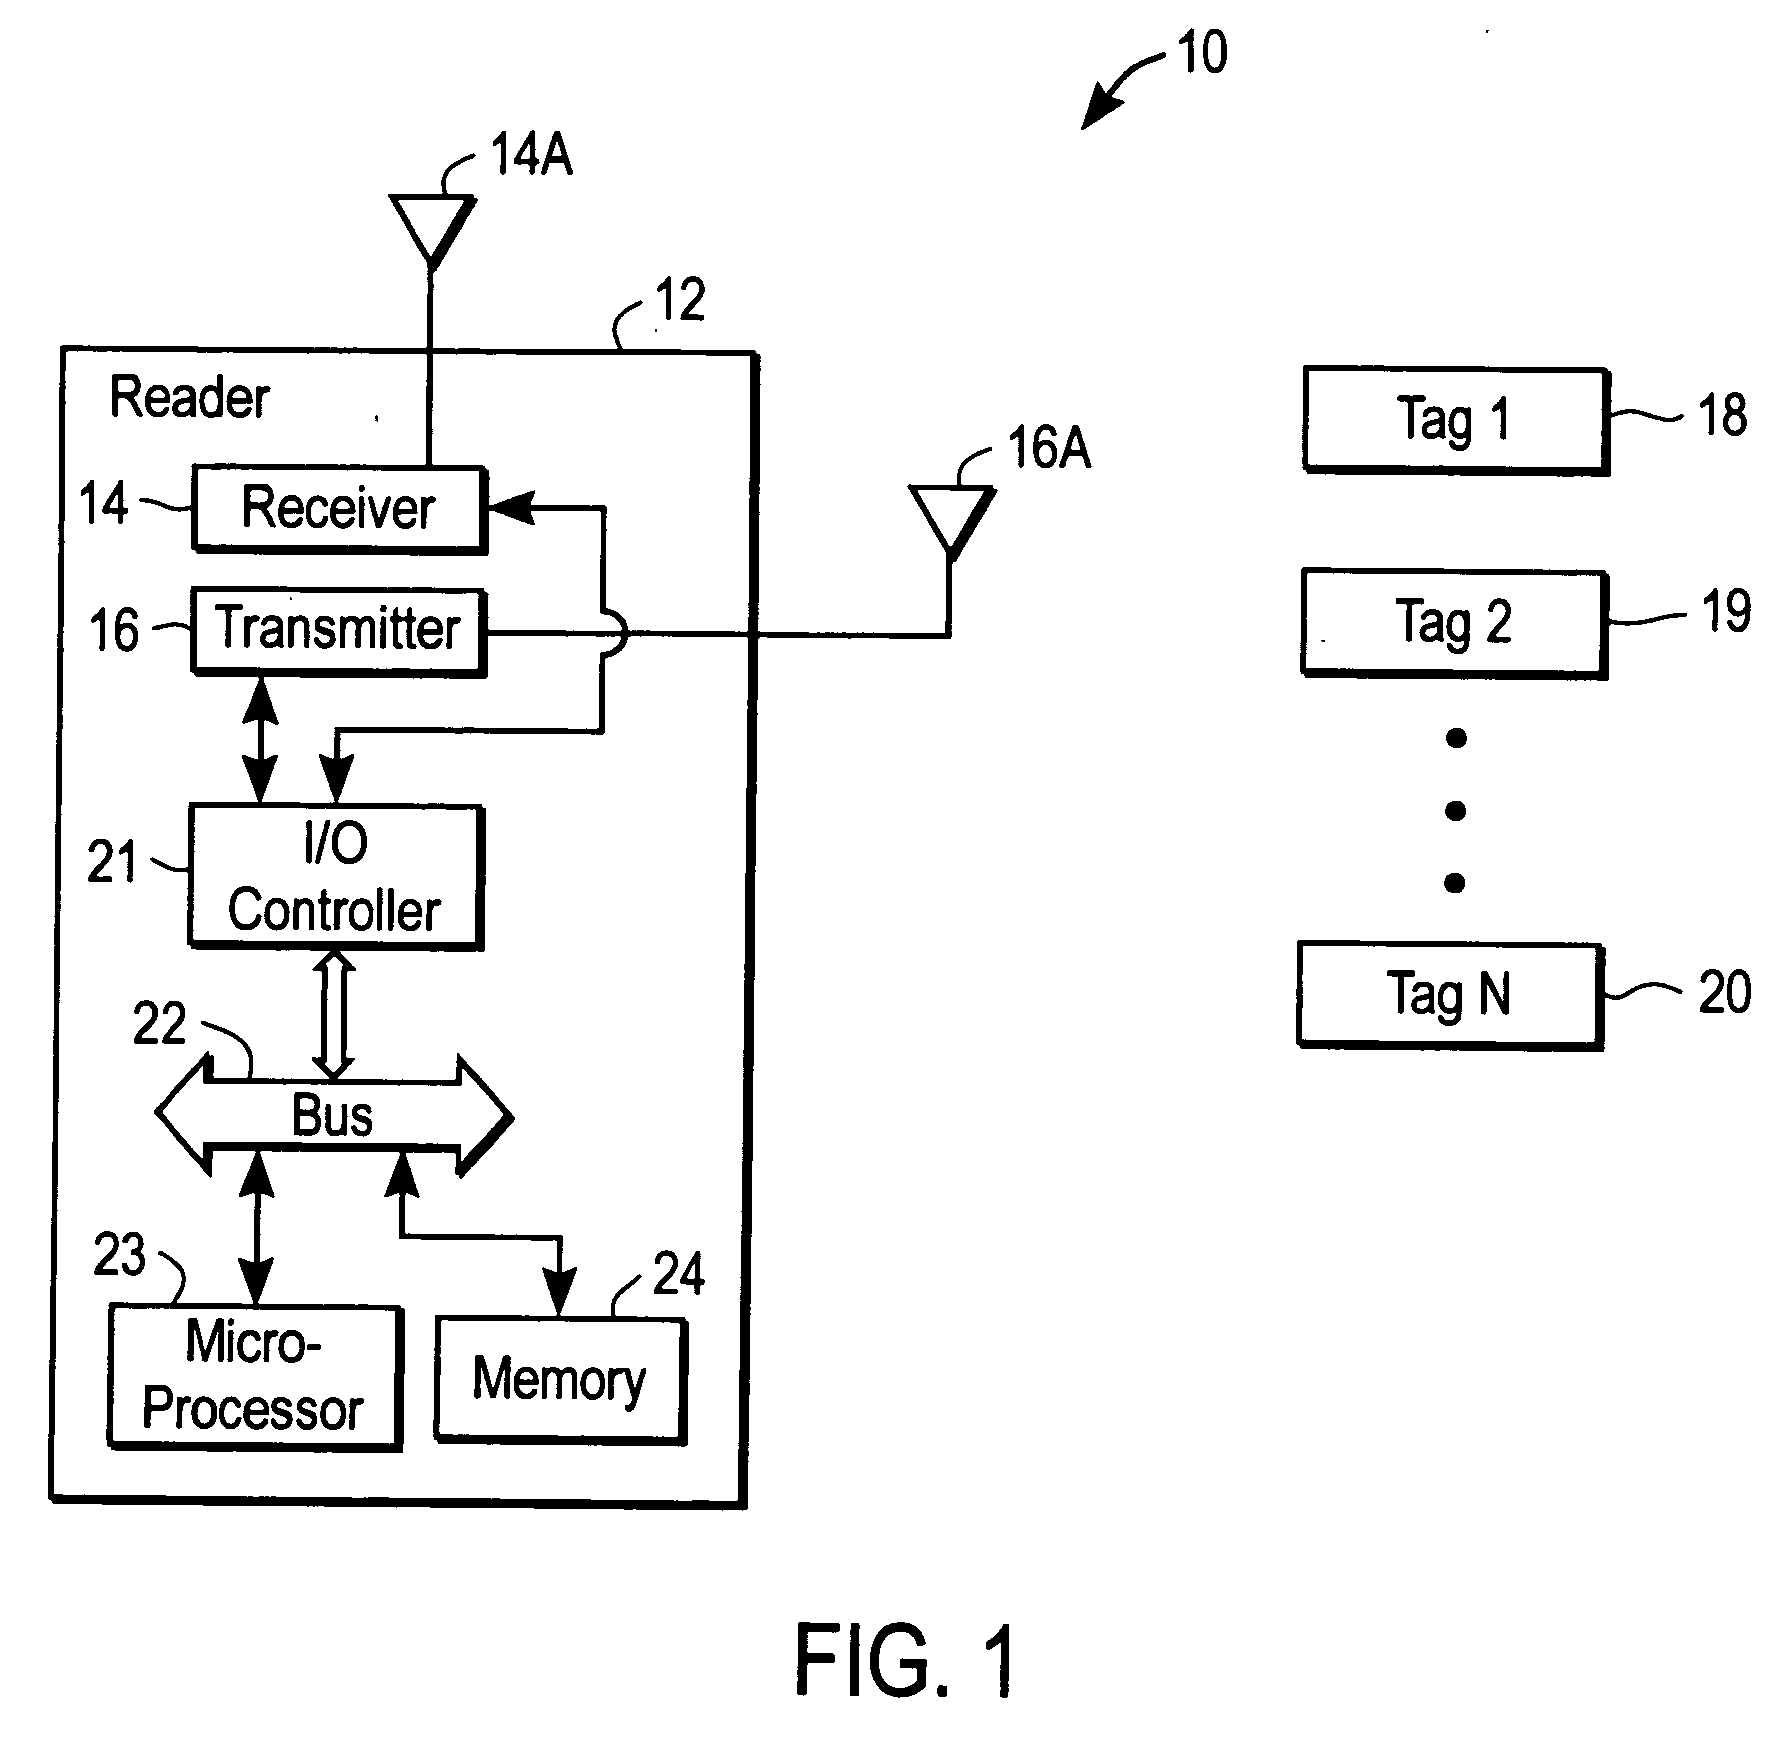 Methods and apparatuses to identify devices